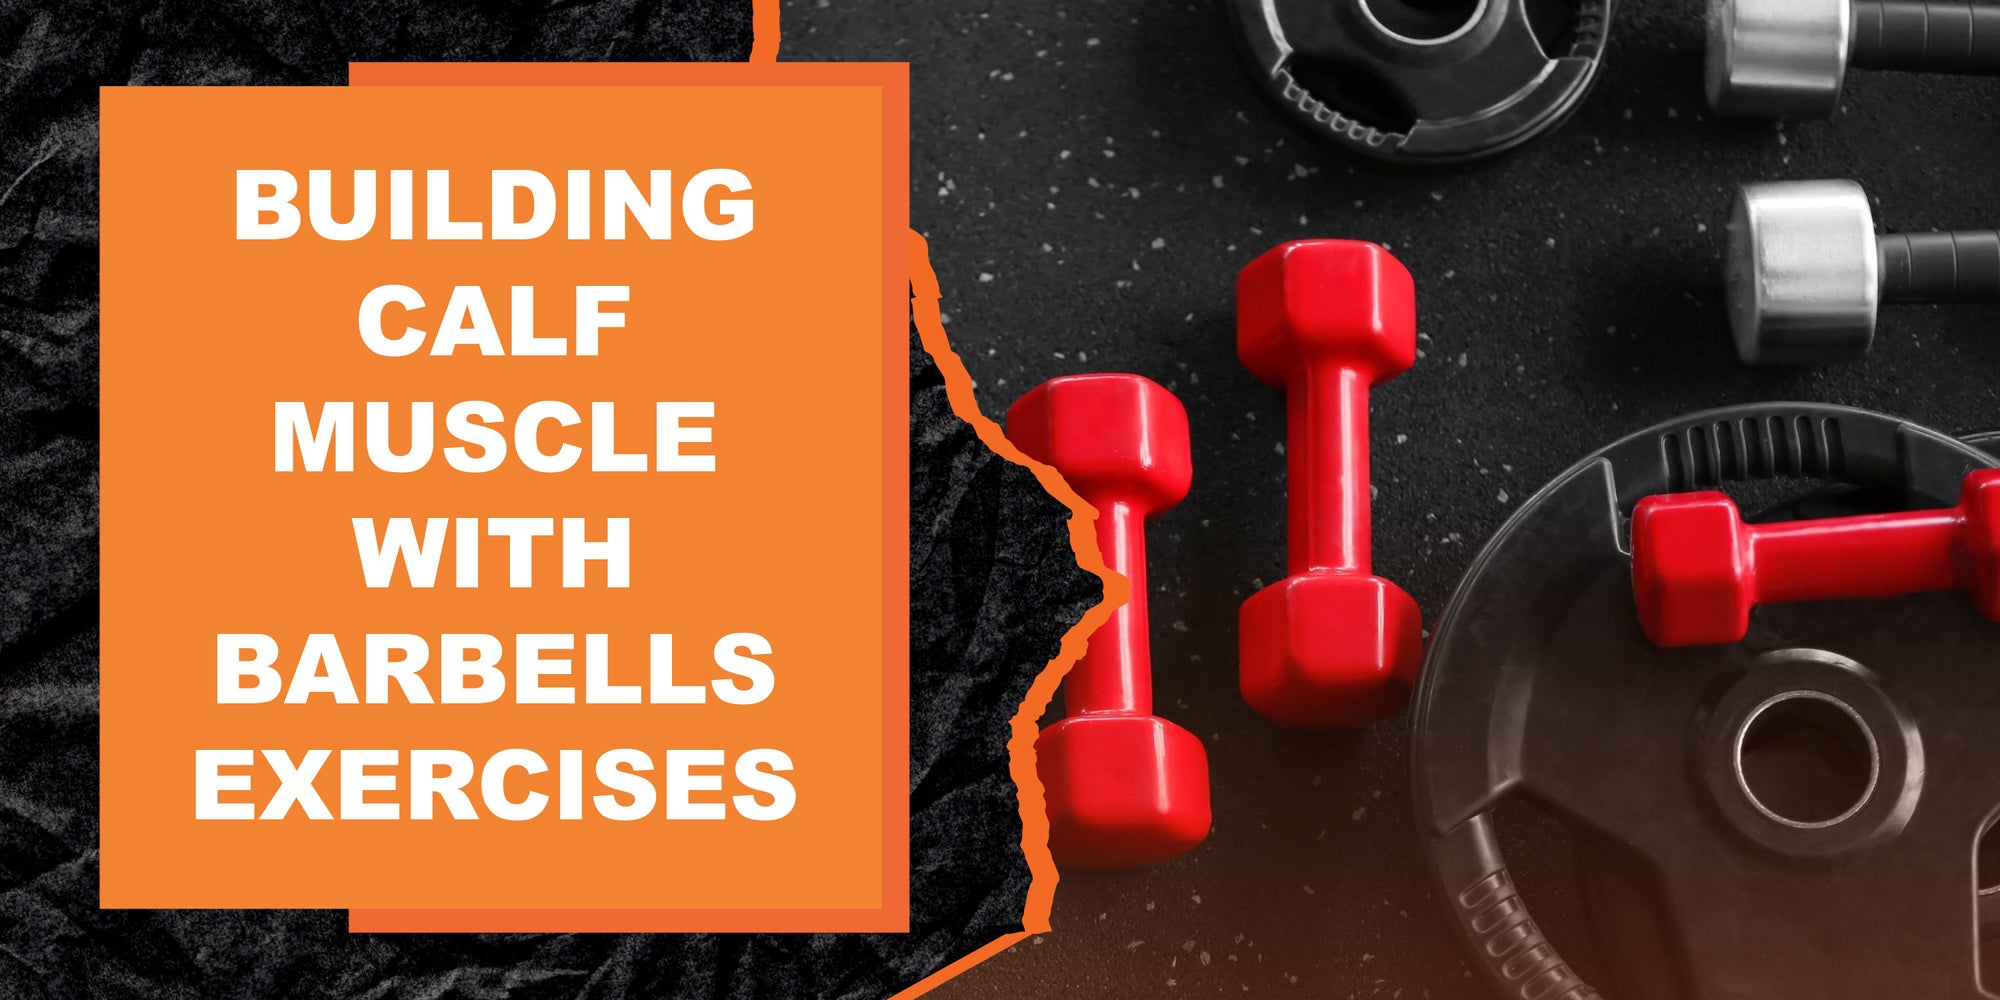 Building Calf Muscle with Barbells Exercises